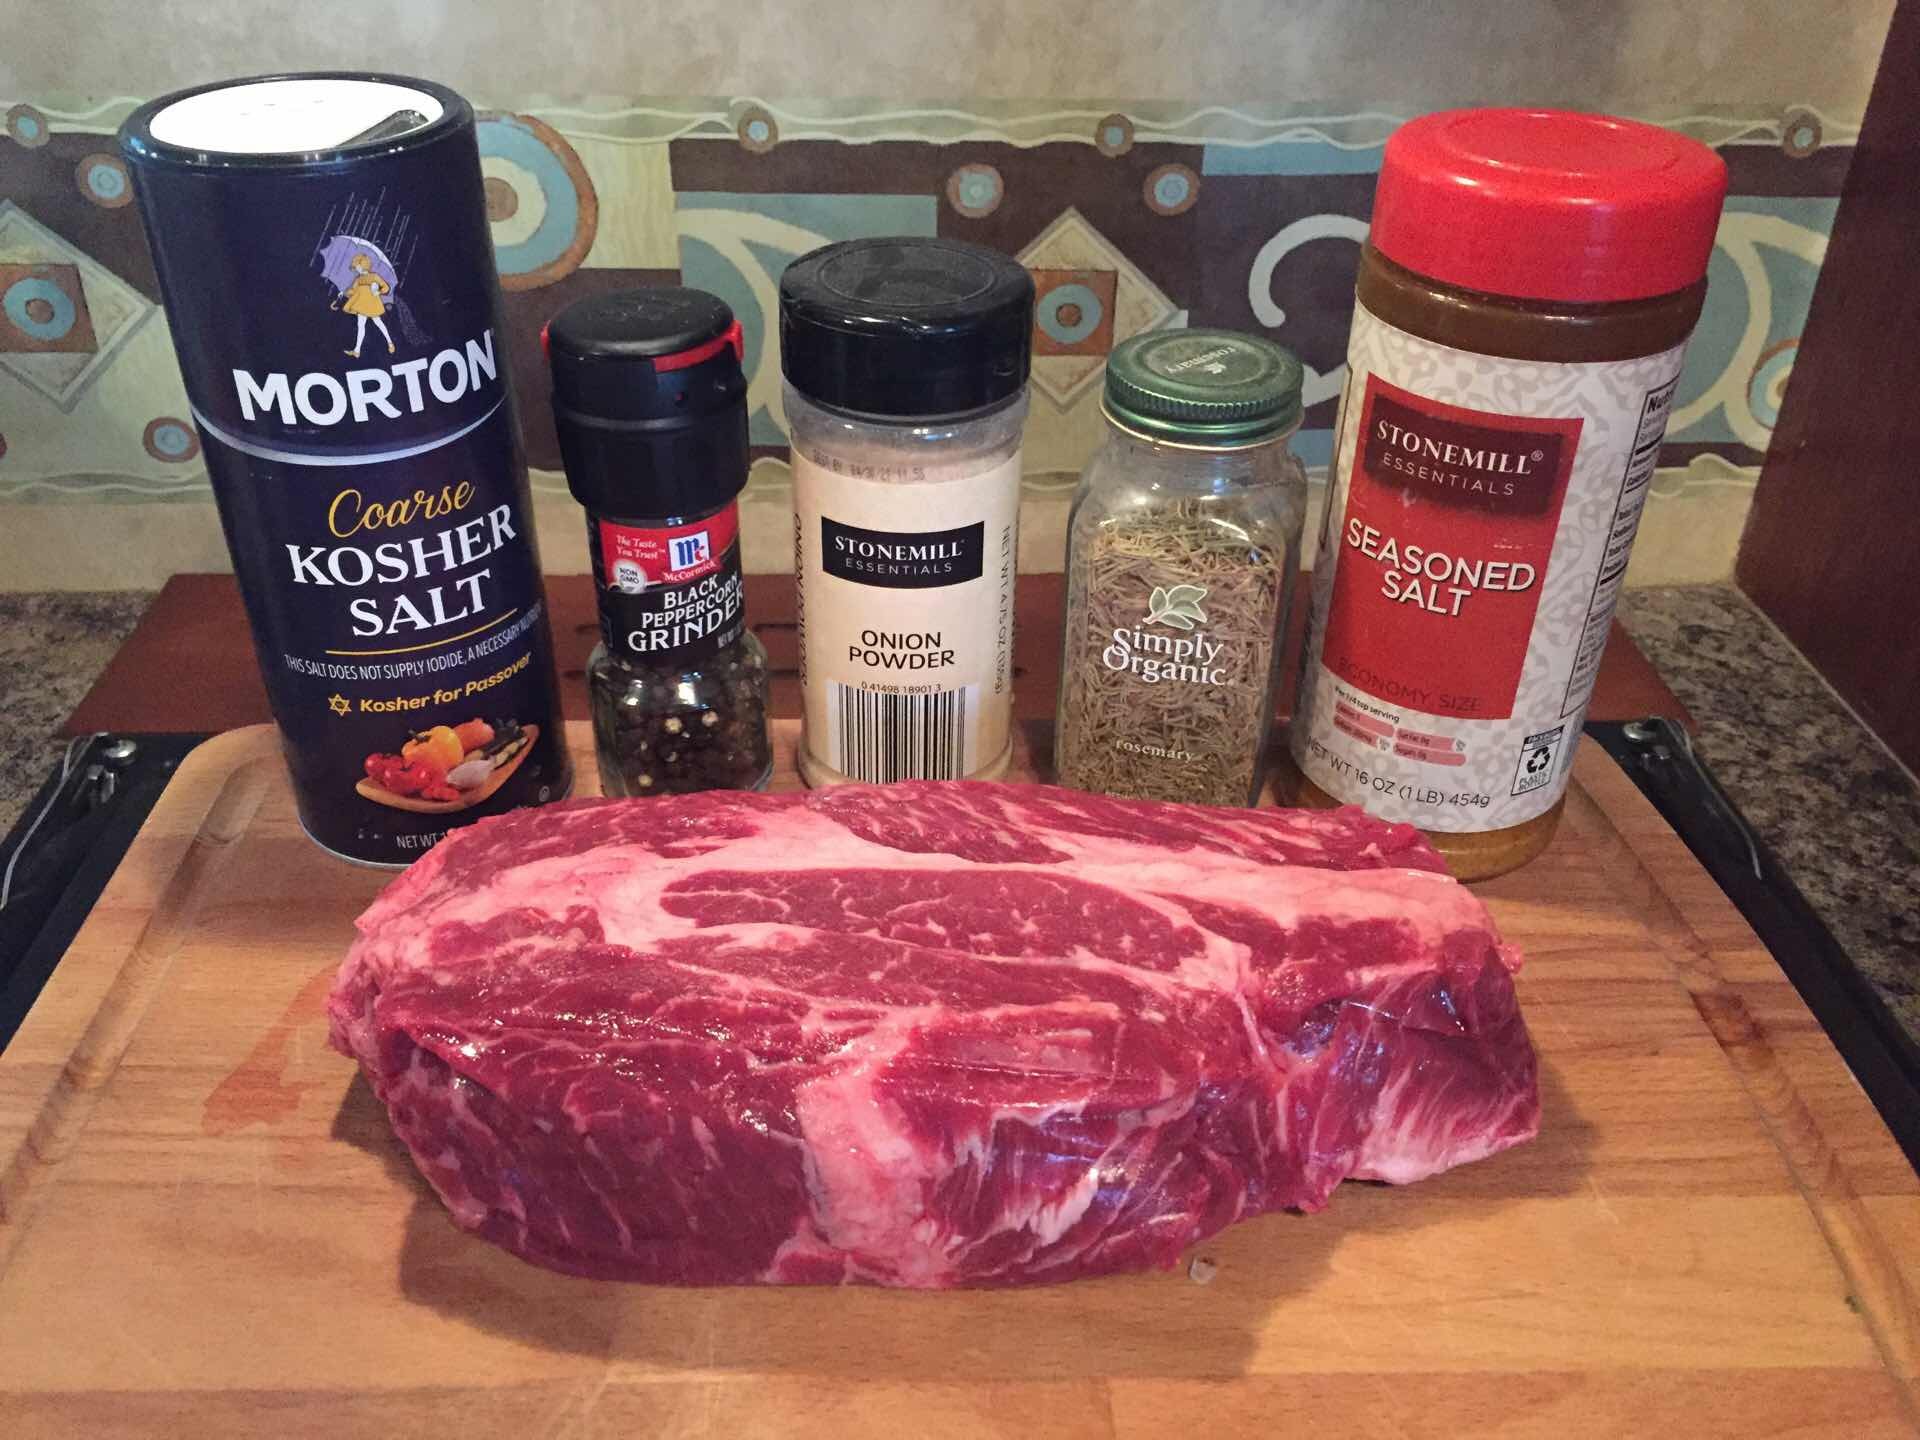 This is 2 lbs* of chuck roast with all the spices needed for the rub.*Okay, 2.01 lbs to be exact, but who's counting?